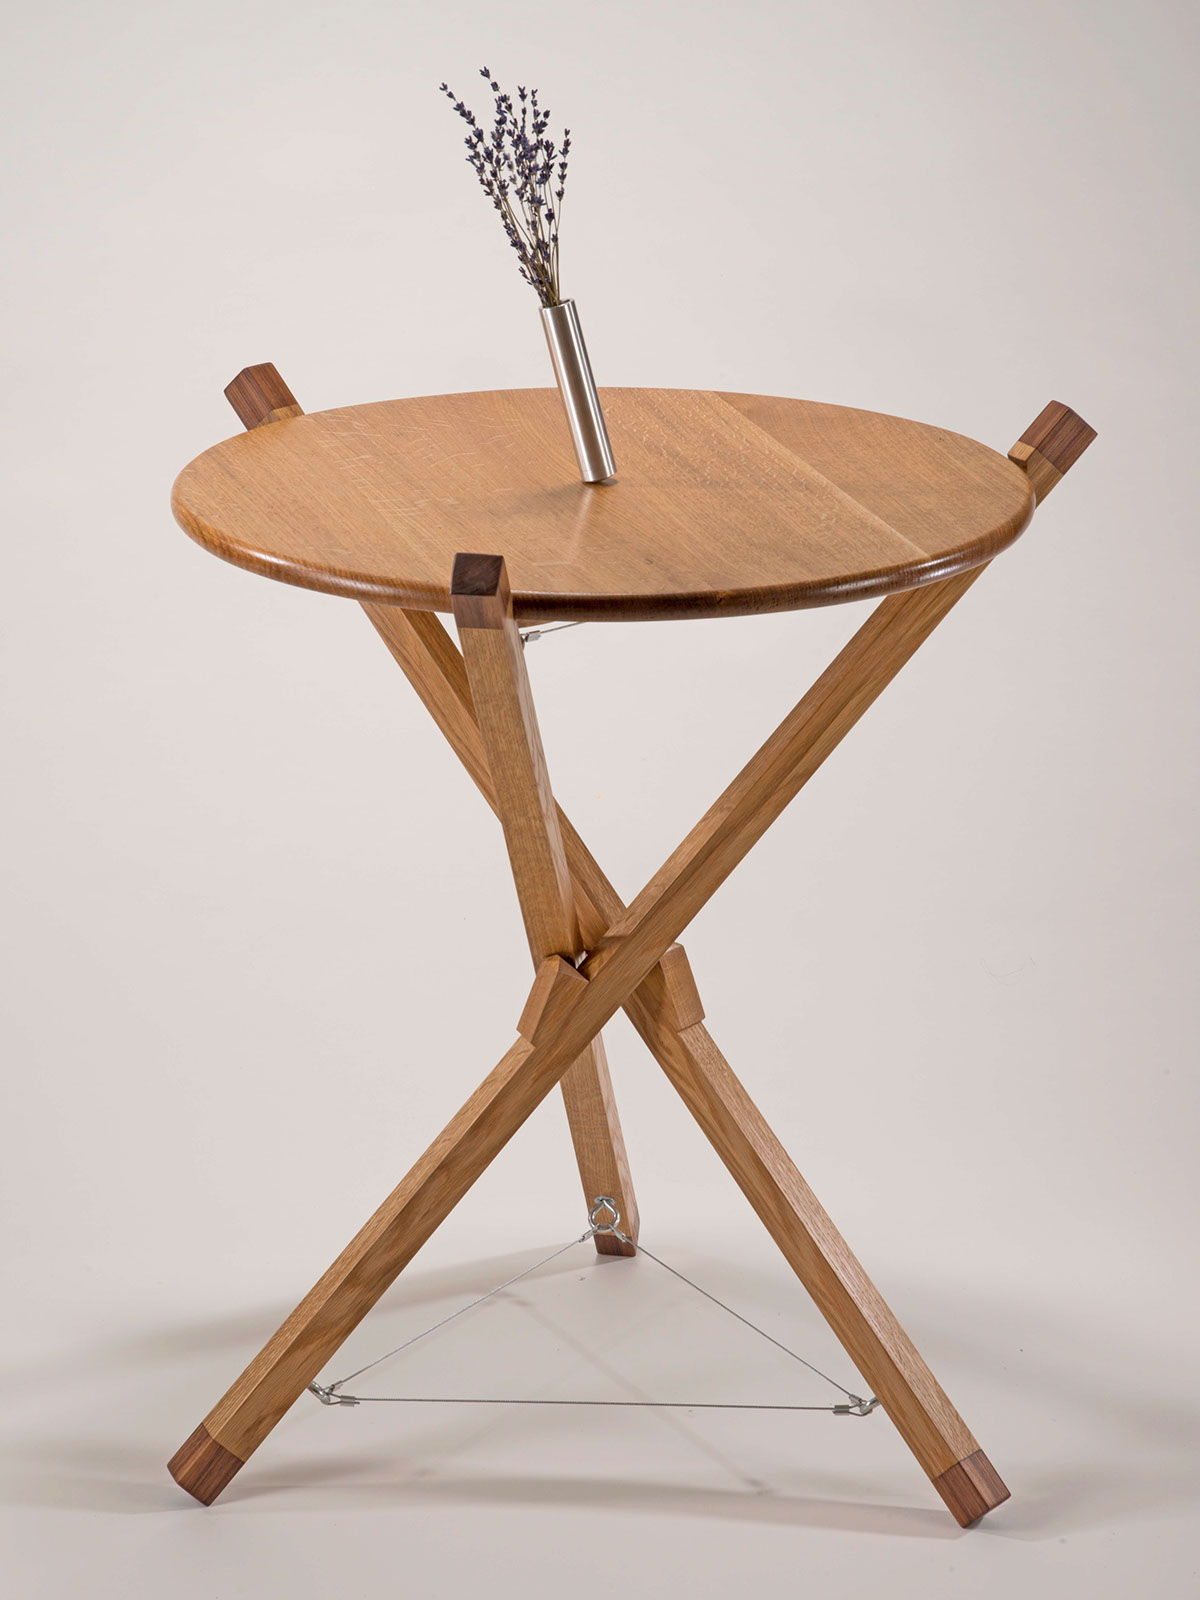 furniture table wood interaction sculpture kinetic